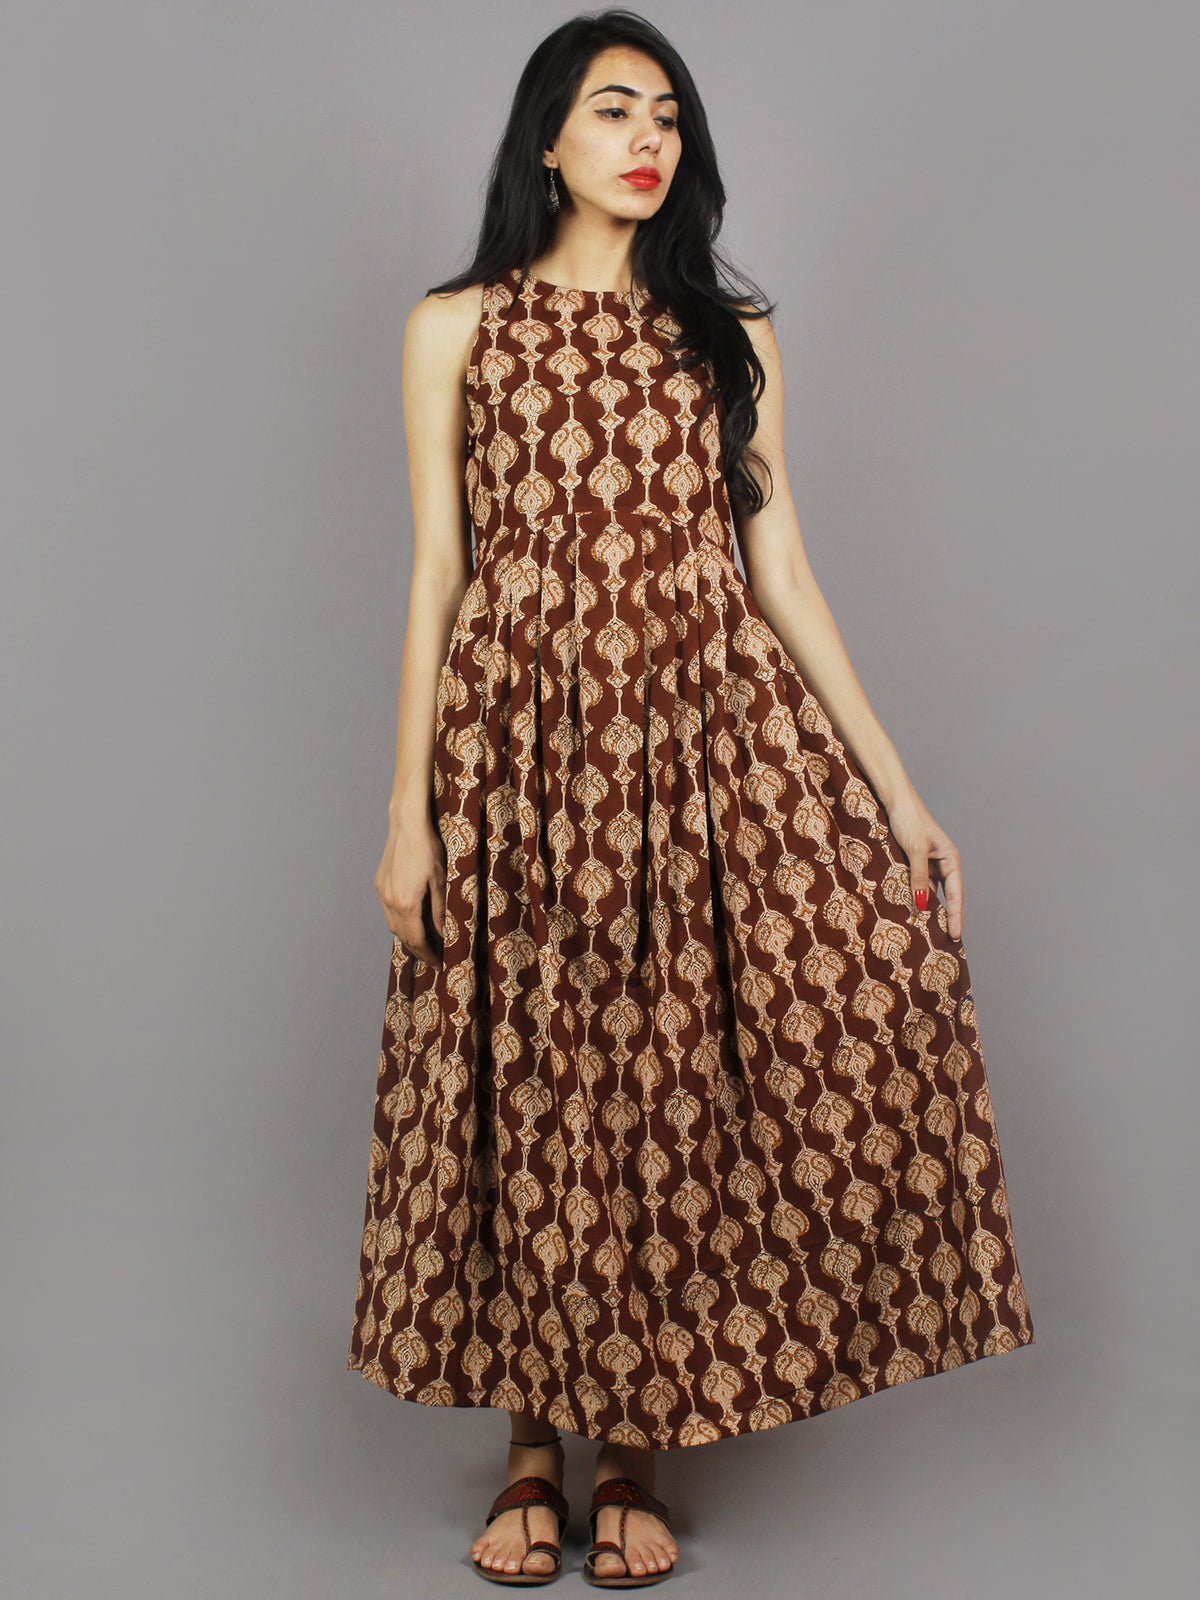 Chocolate Brown Beige Black Long Sleeveless Hand Block Printed Cotton Dress With Knife Pleats & Side Pockets - D3258201